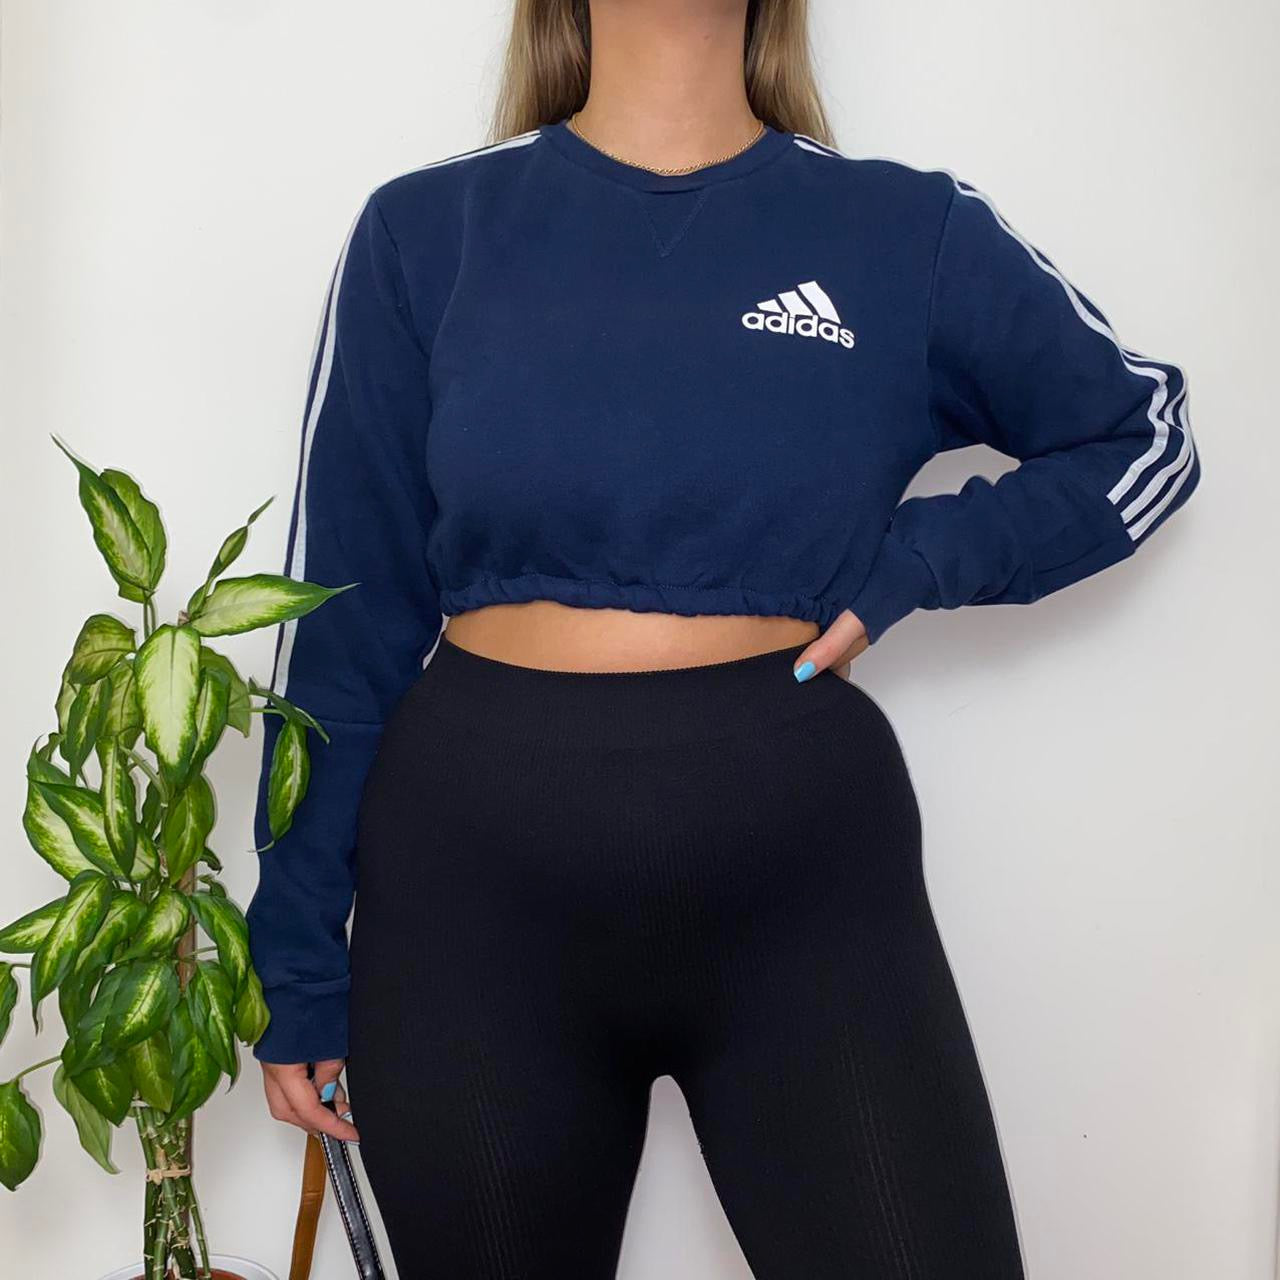 navy sweatshirt with small adidas text and symbol logo on chest with white 3 stripes on arms shown on model wearing black leggings